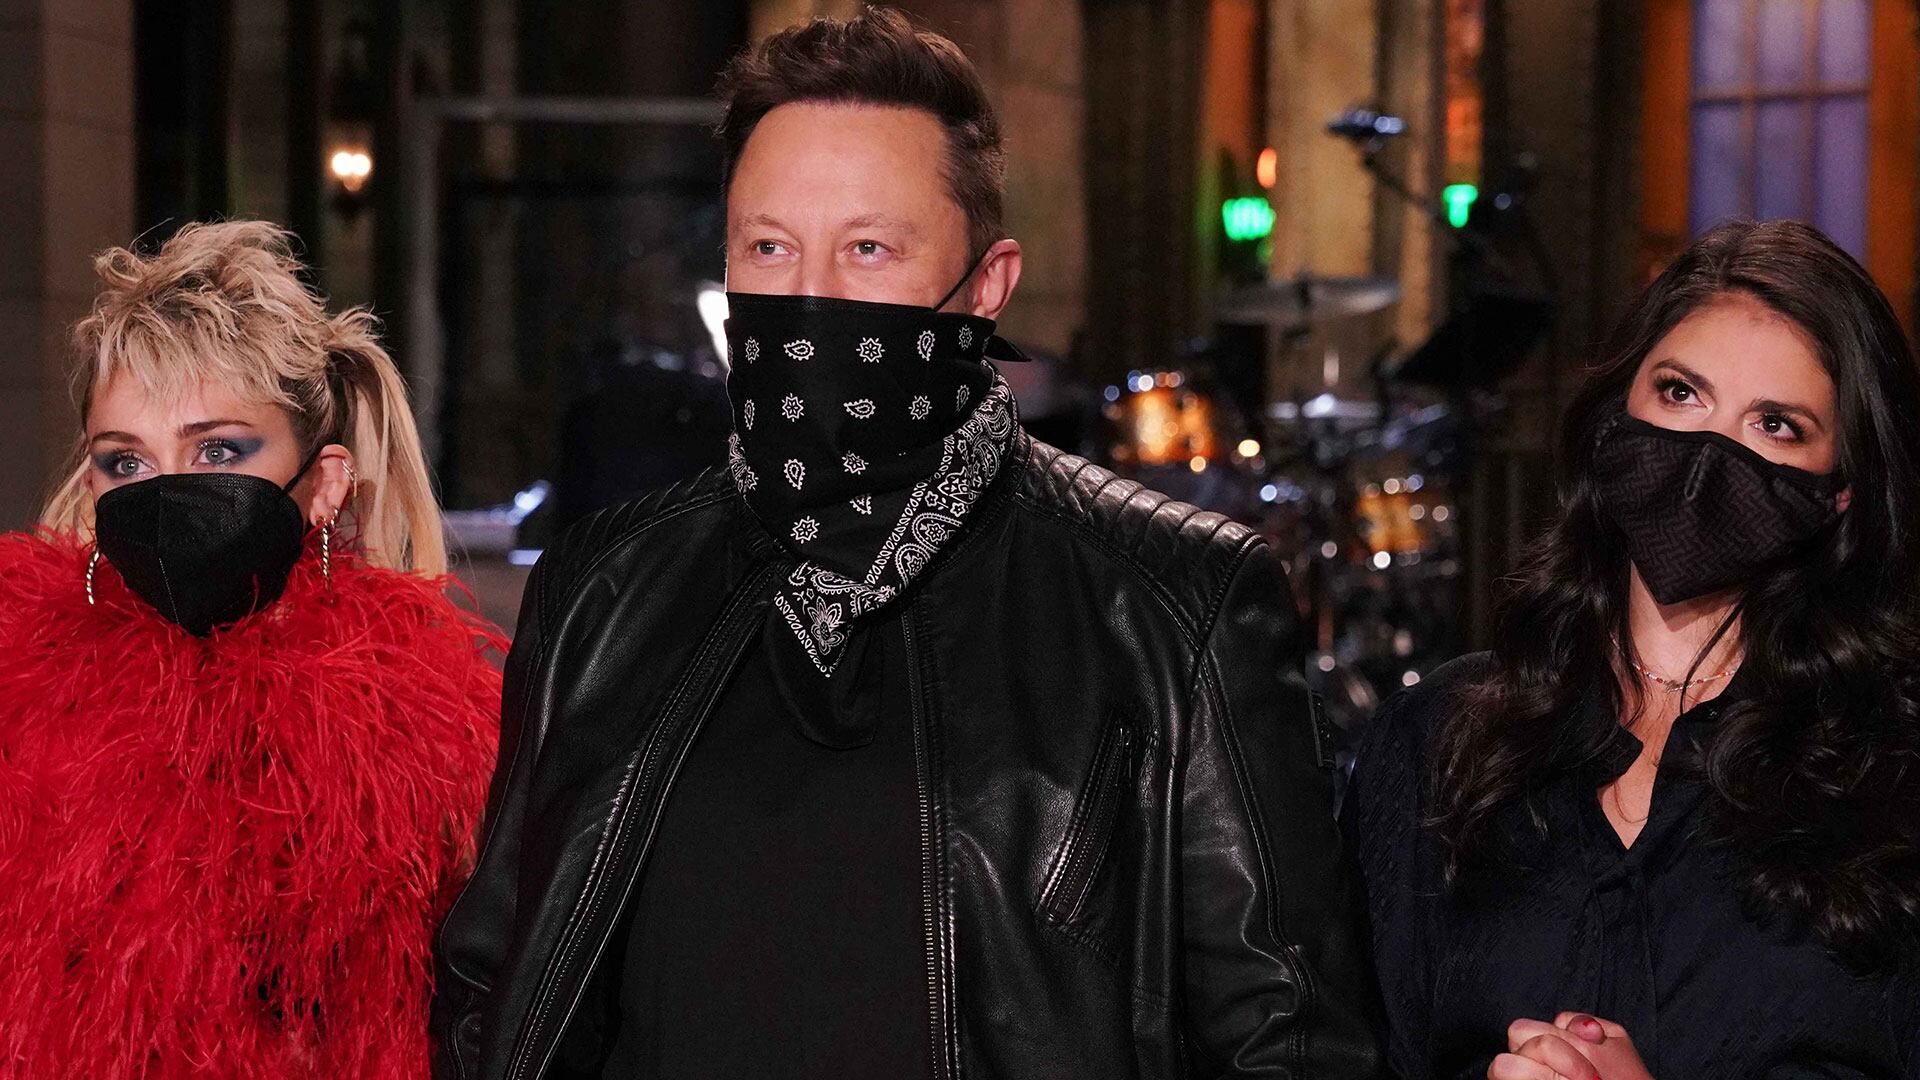 How to watch Elon Musk on SNL stream Saturday Night Live clips and